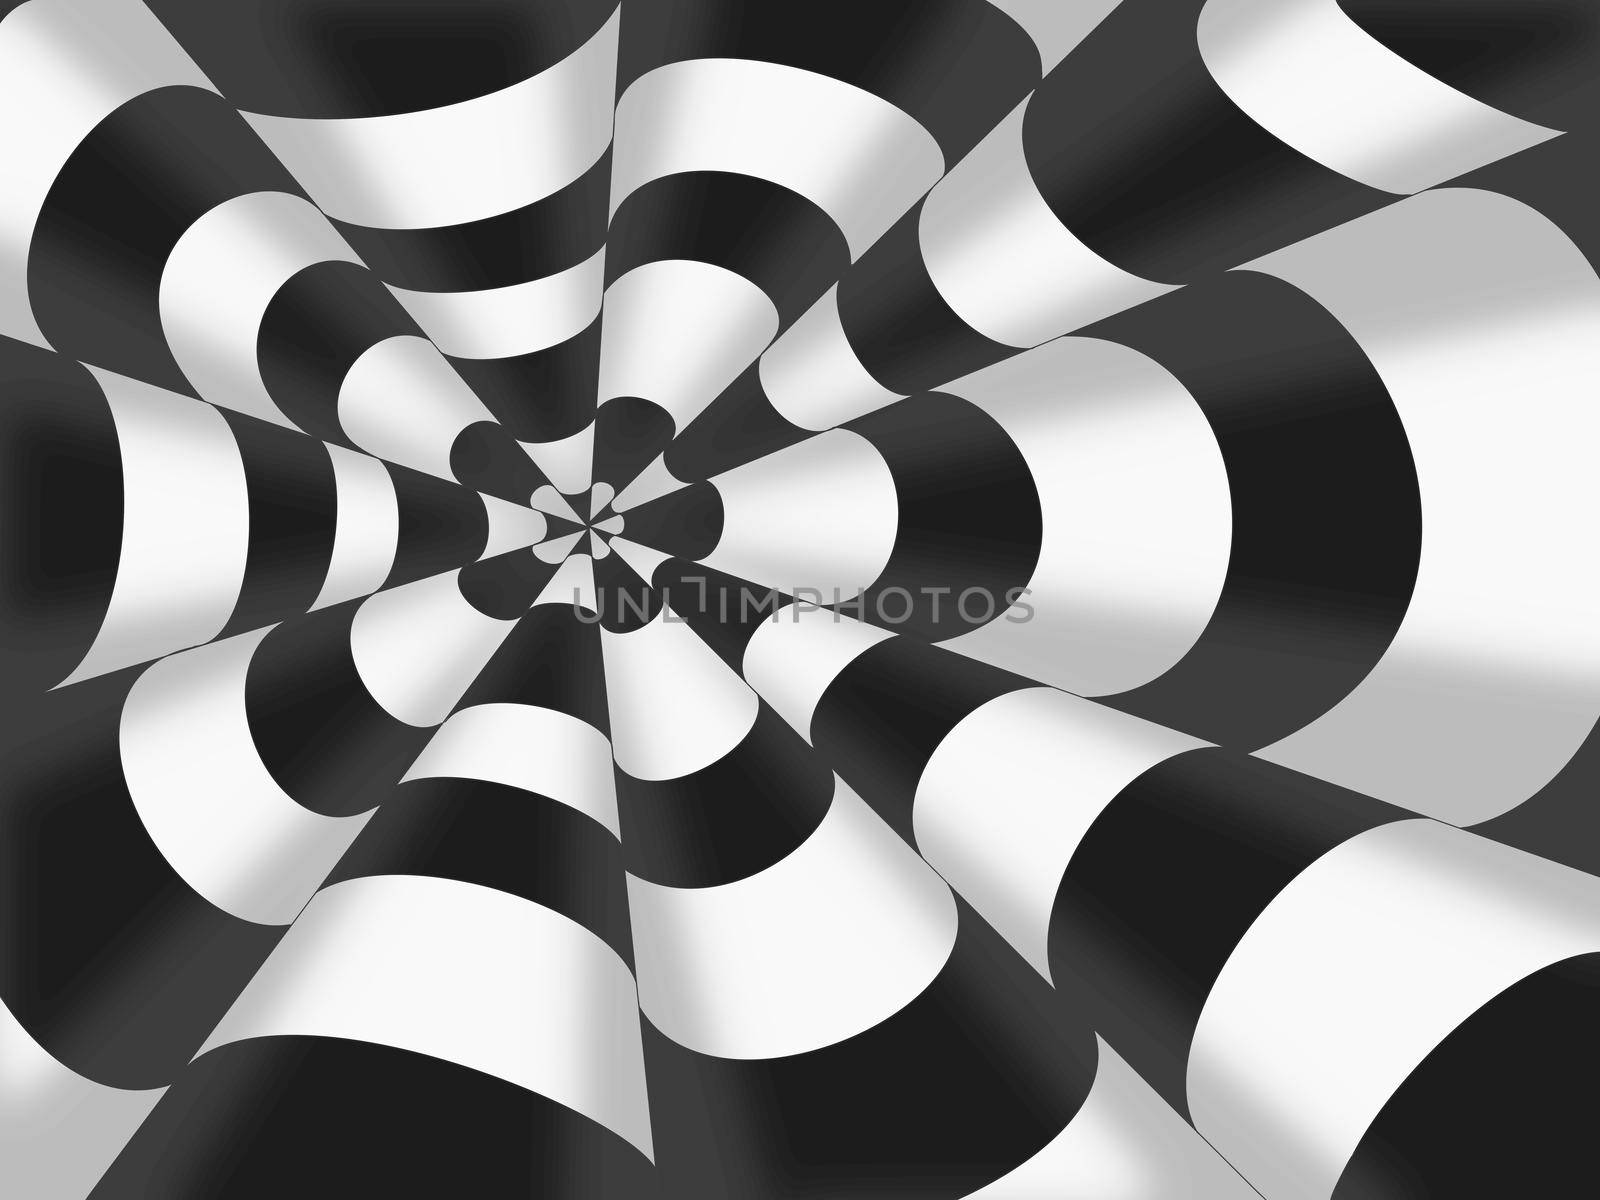 3d drawing of striped cones. Volumetric pattern of black and white striped cones by zakob337